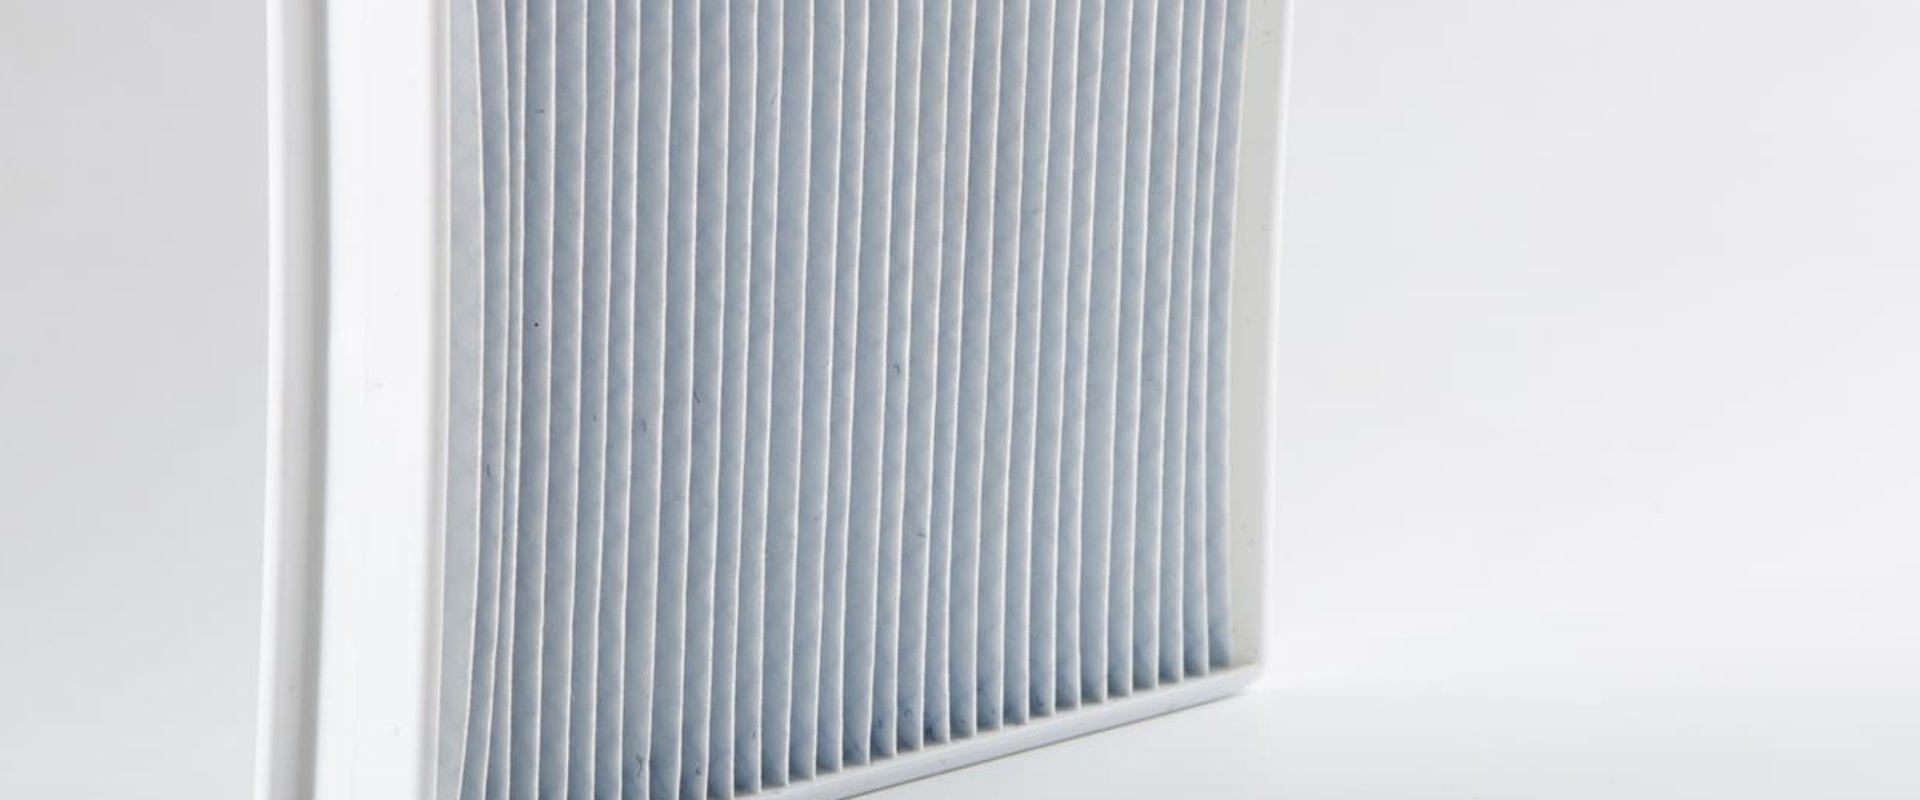 The Benefits of HEPA Filters: How Much Better Are They?